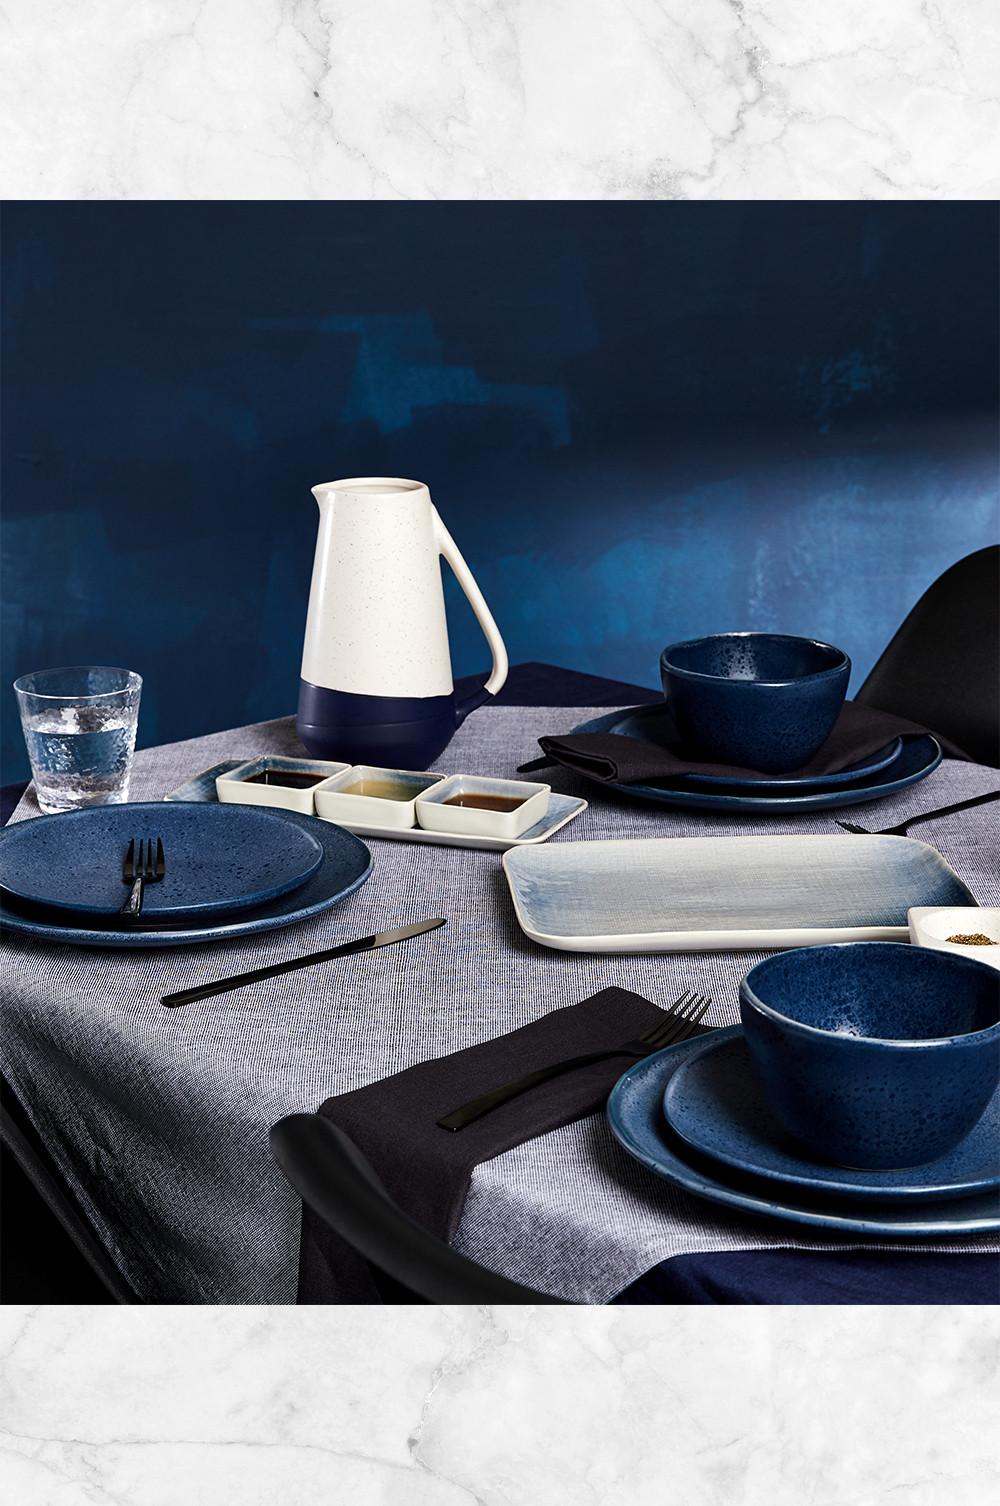 Grey and blue tabletop